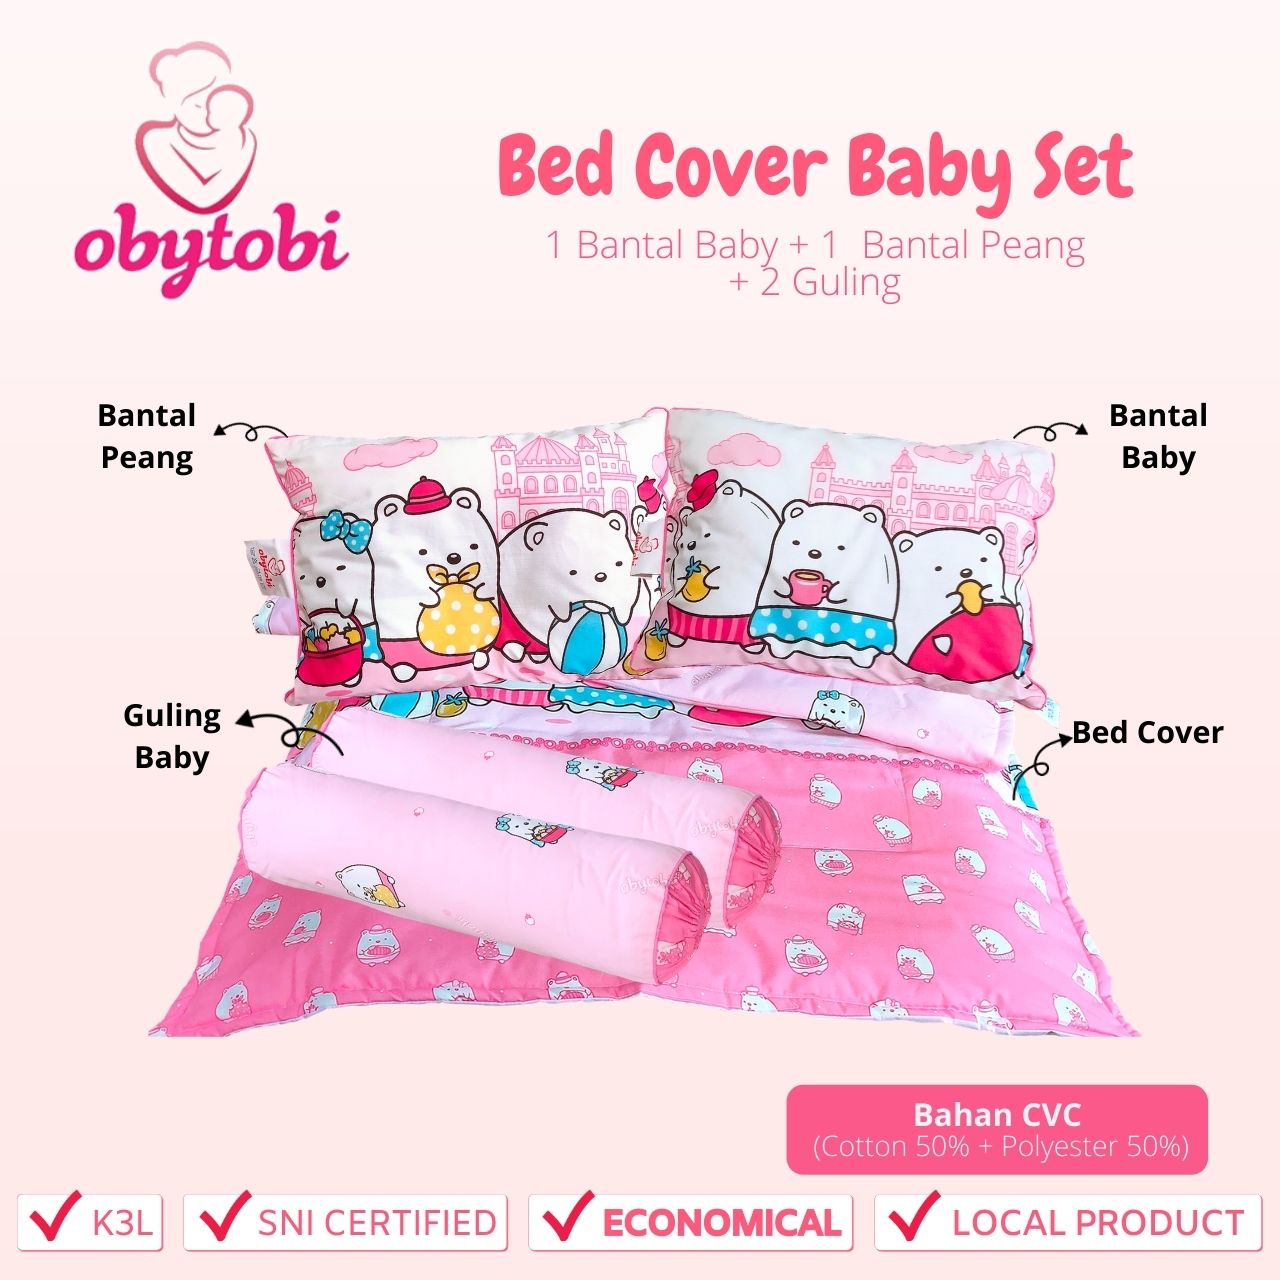 Bed cover baby set 1